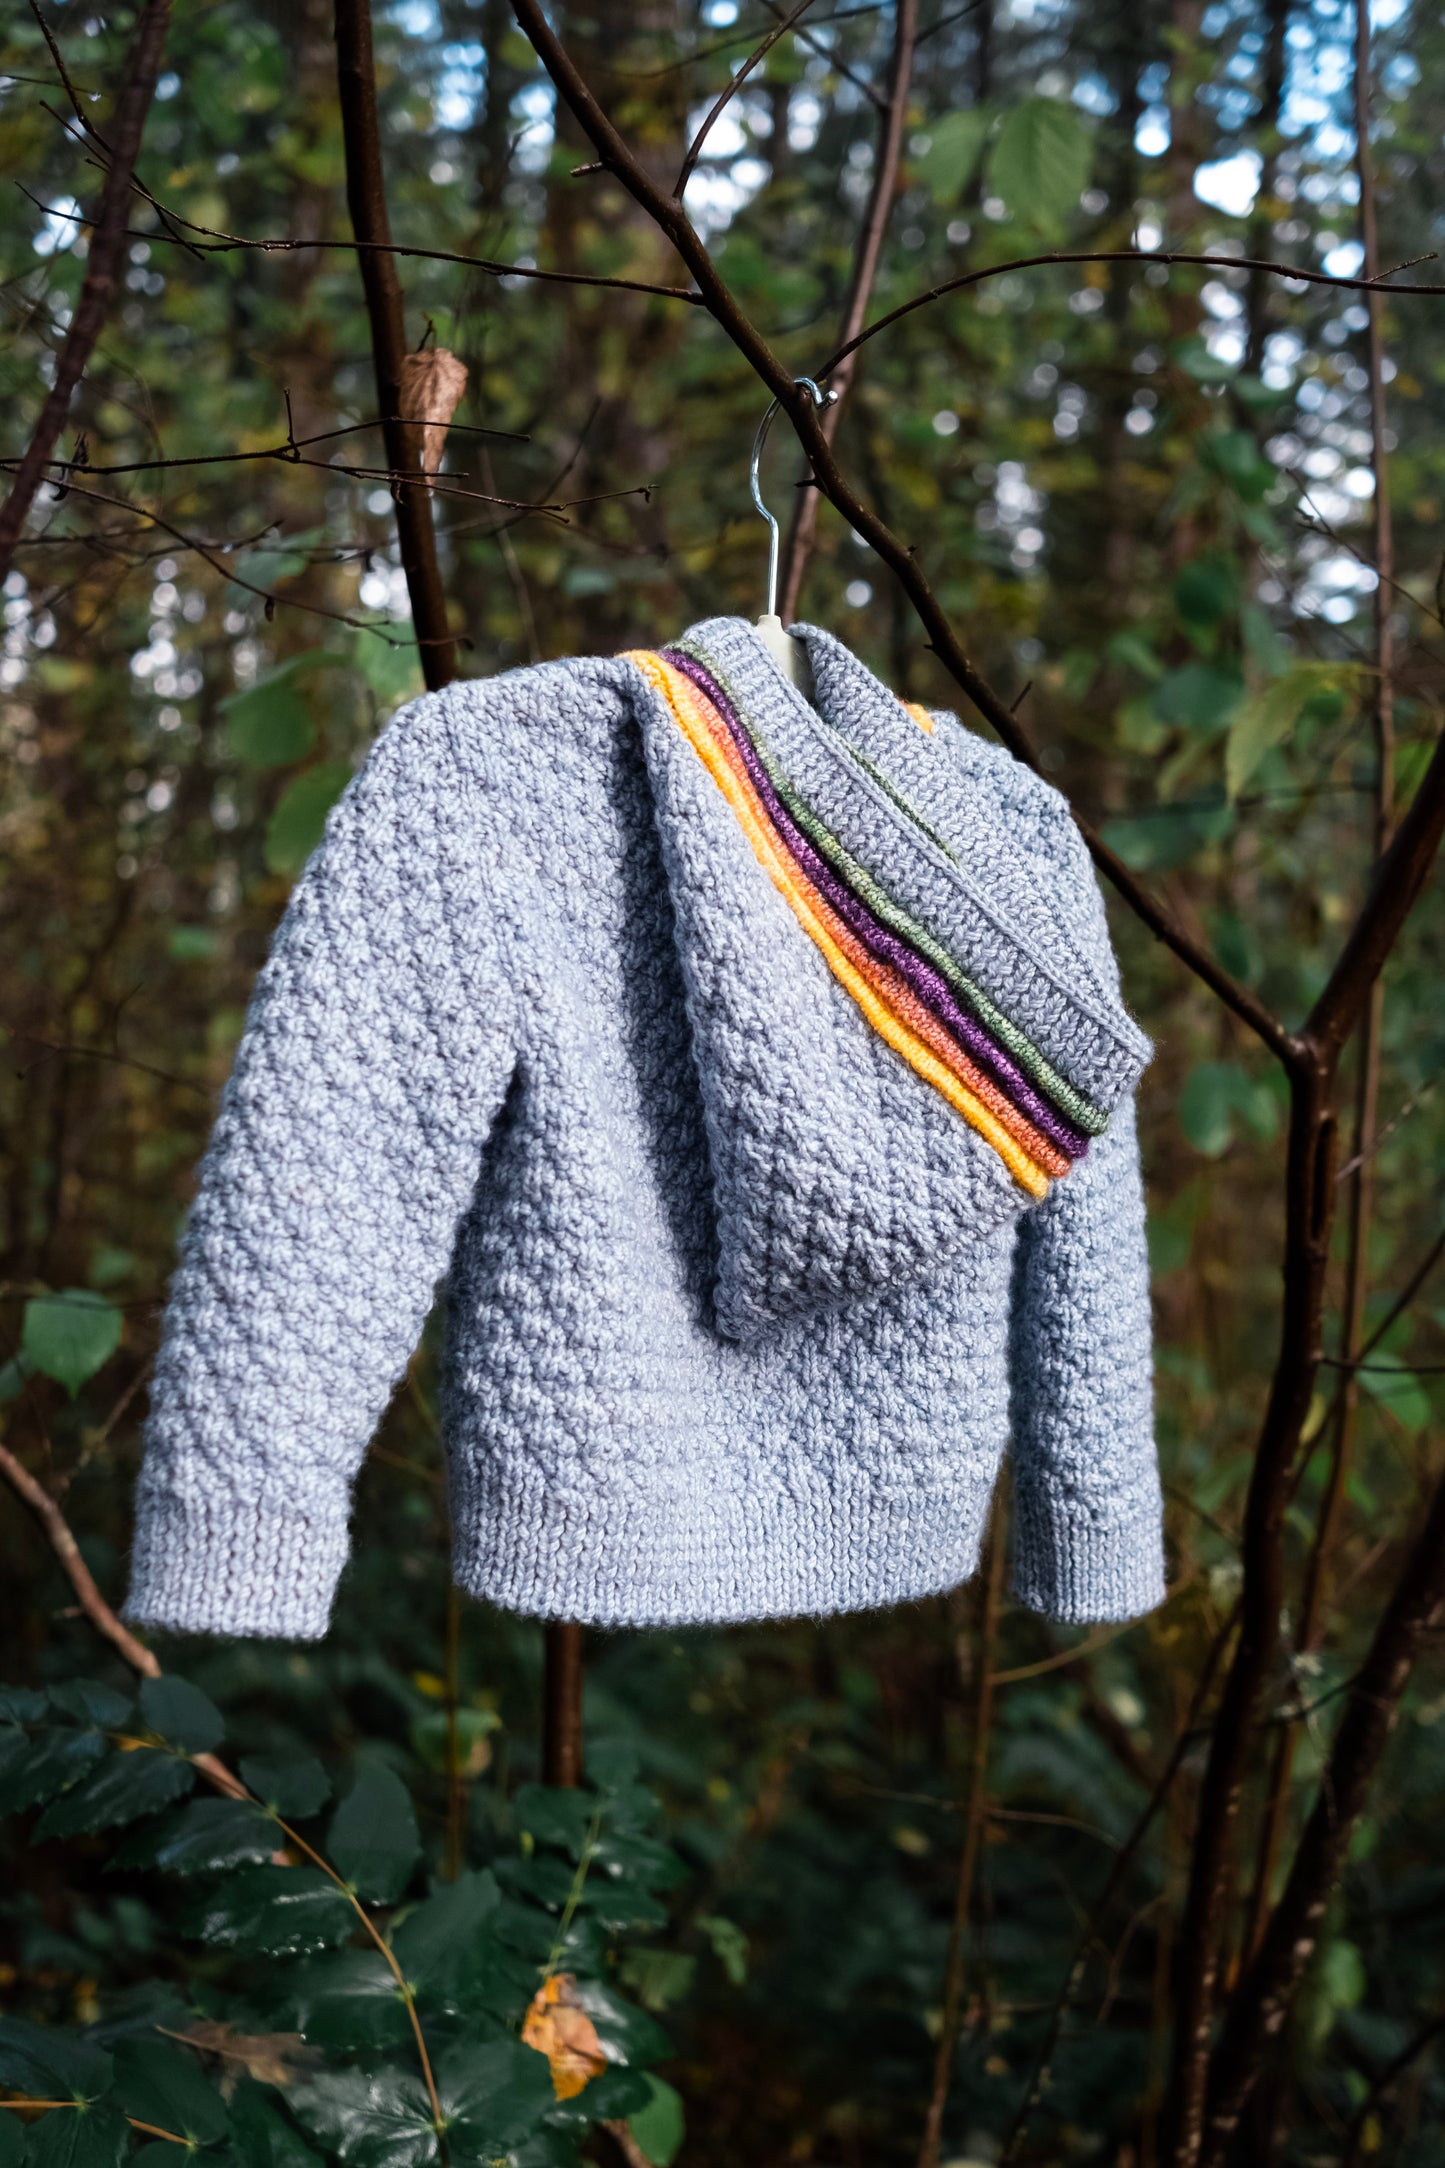 Seen from behind, a moss stitch kid's sweater hangs on a branch. It's made with blue yarn and orange, yellow, purple, and green plackets around the button band and up the hood.